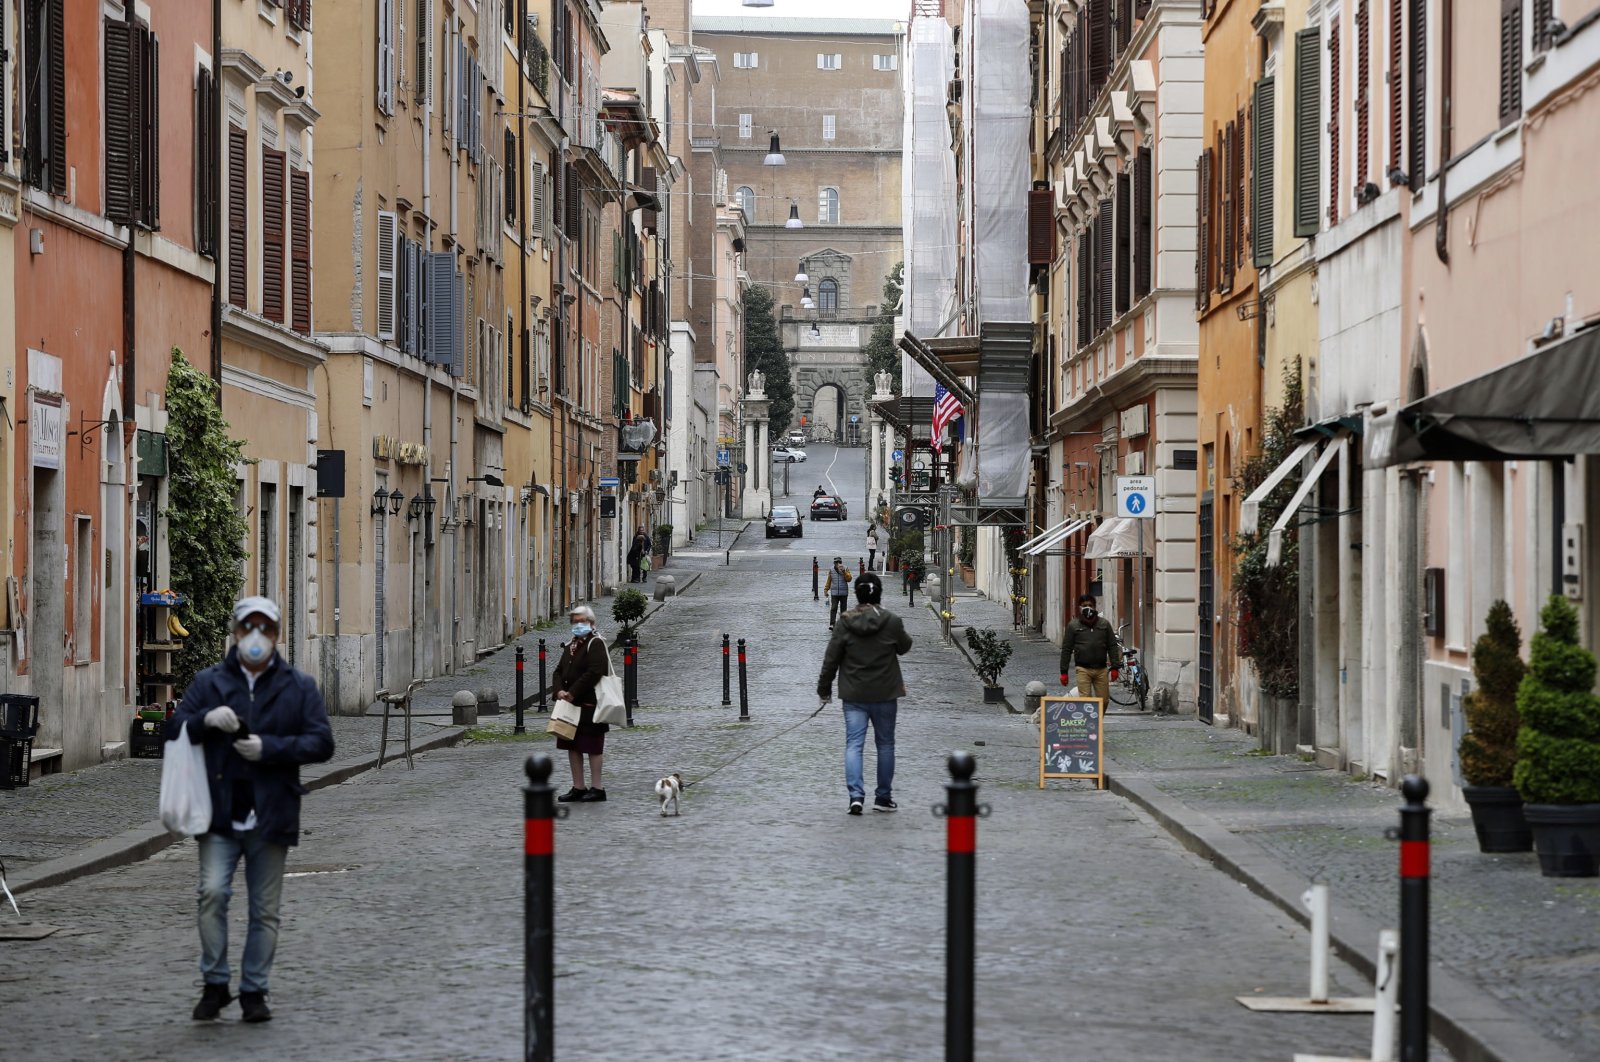 People wearing face masks walk on a street, during the coronavirus lockdown in Rome, in Borgo Pio, Italy, Monday, March 30, 2020. (EPA Photo)